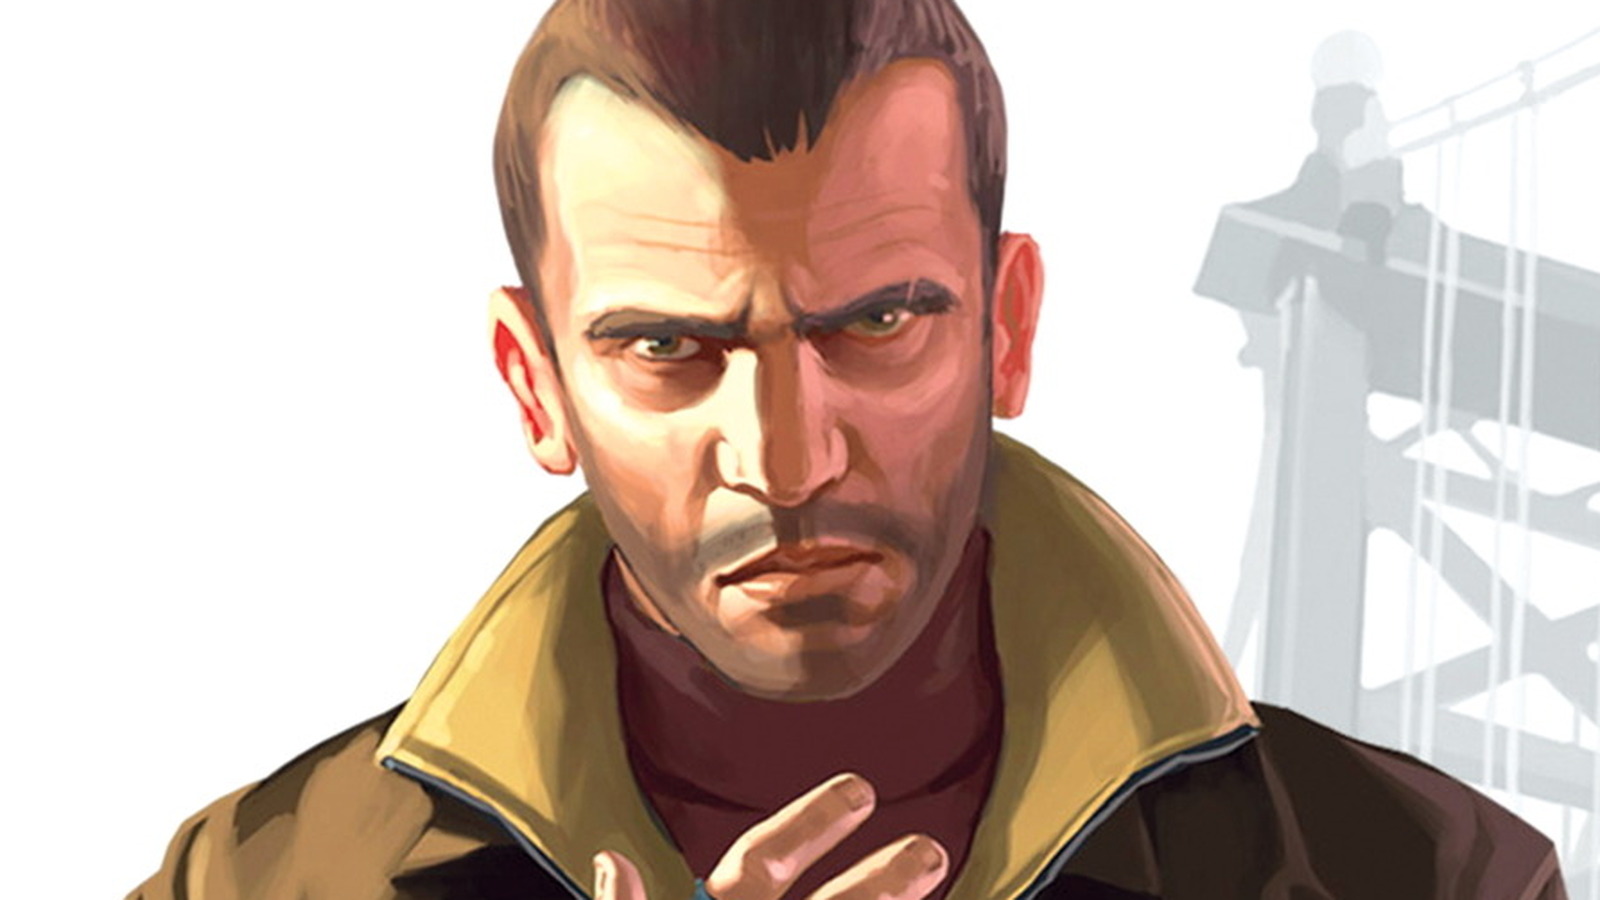 What is Niko's nationality in GTA 4?